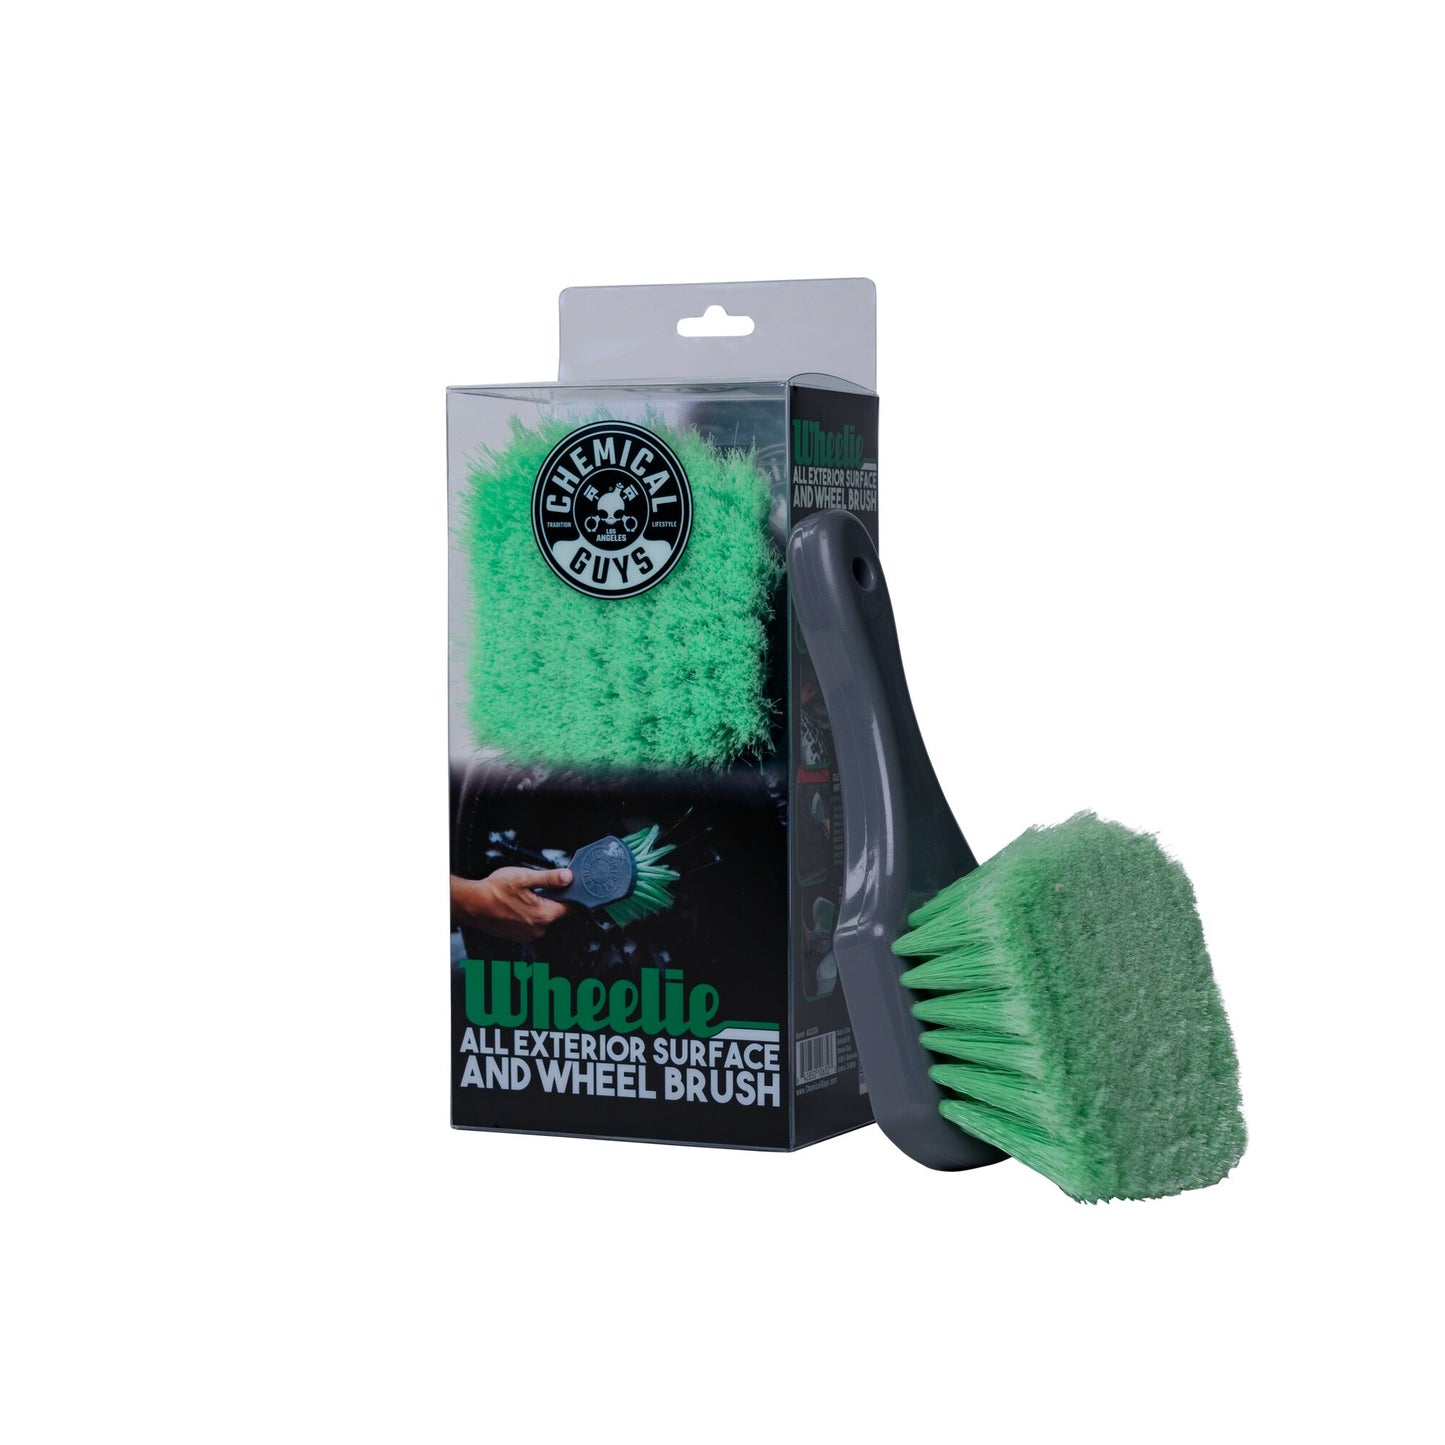 Wheelie All Exterior Surface And Wheel Brush